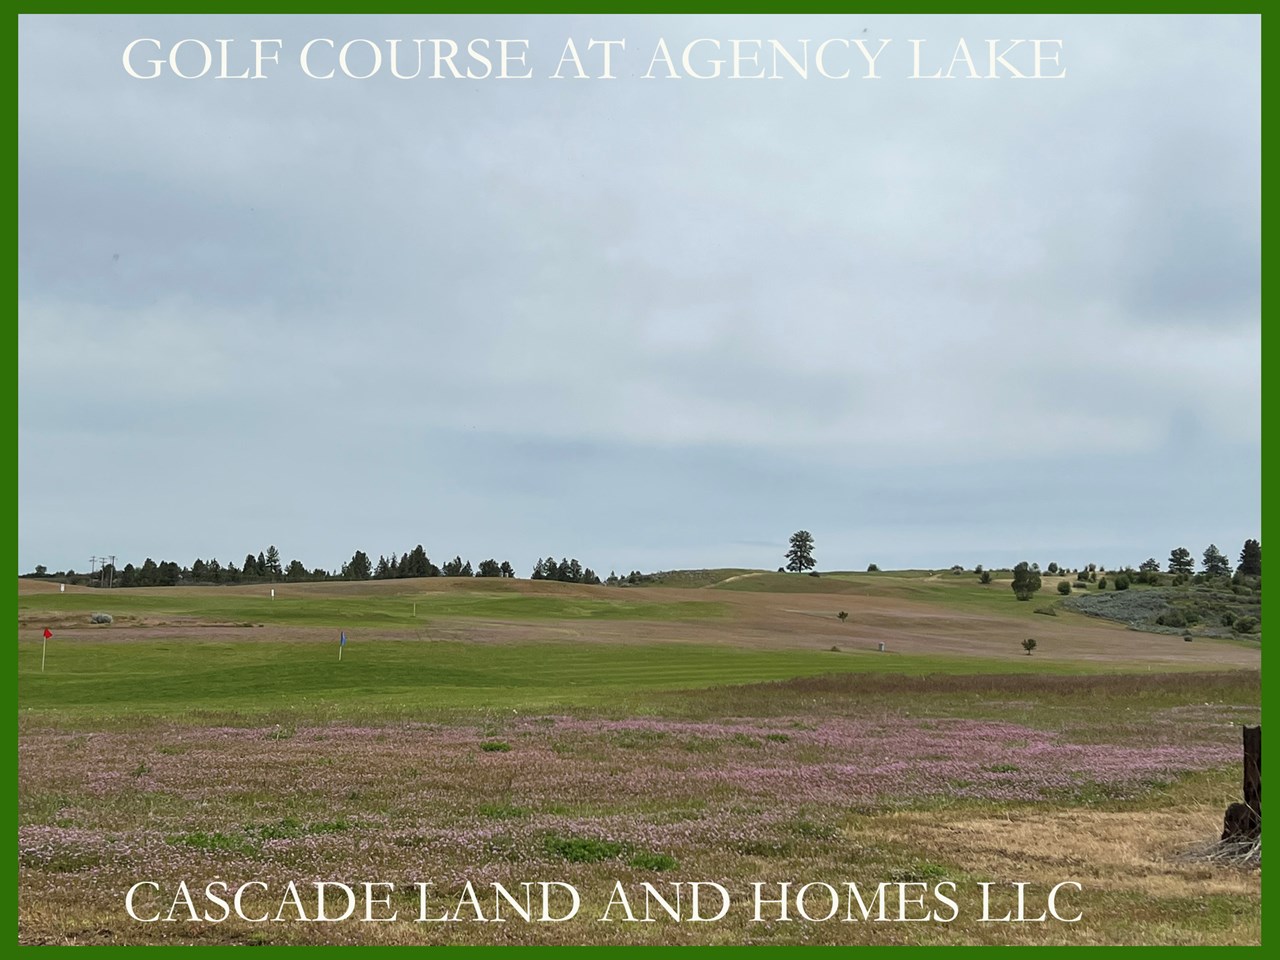 the golf facilities at agency lake are just down the road from the property!